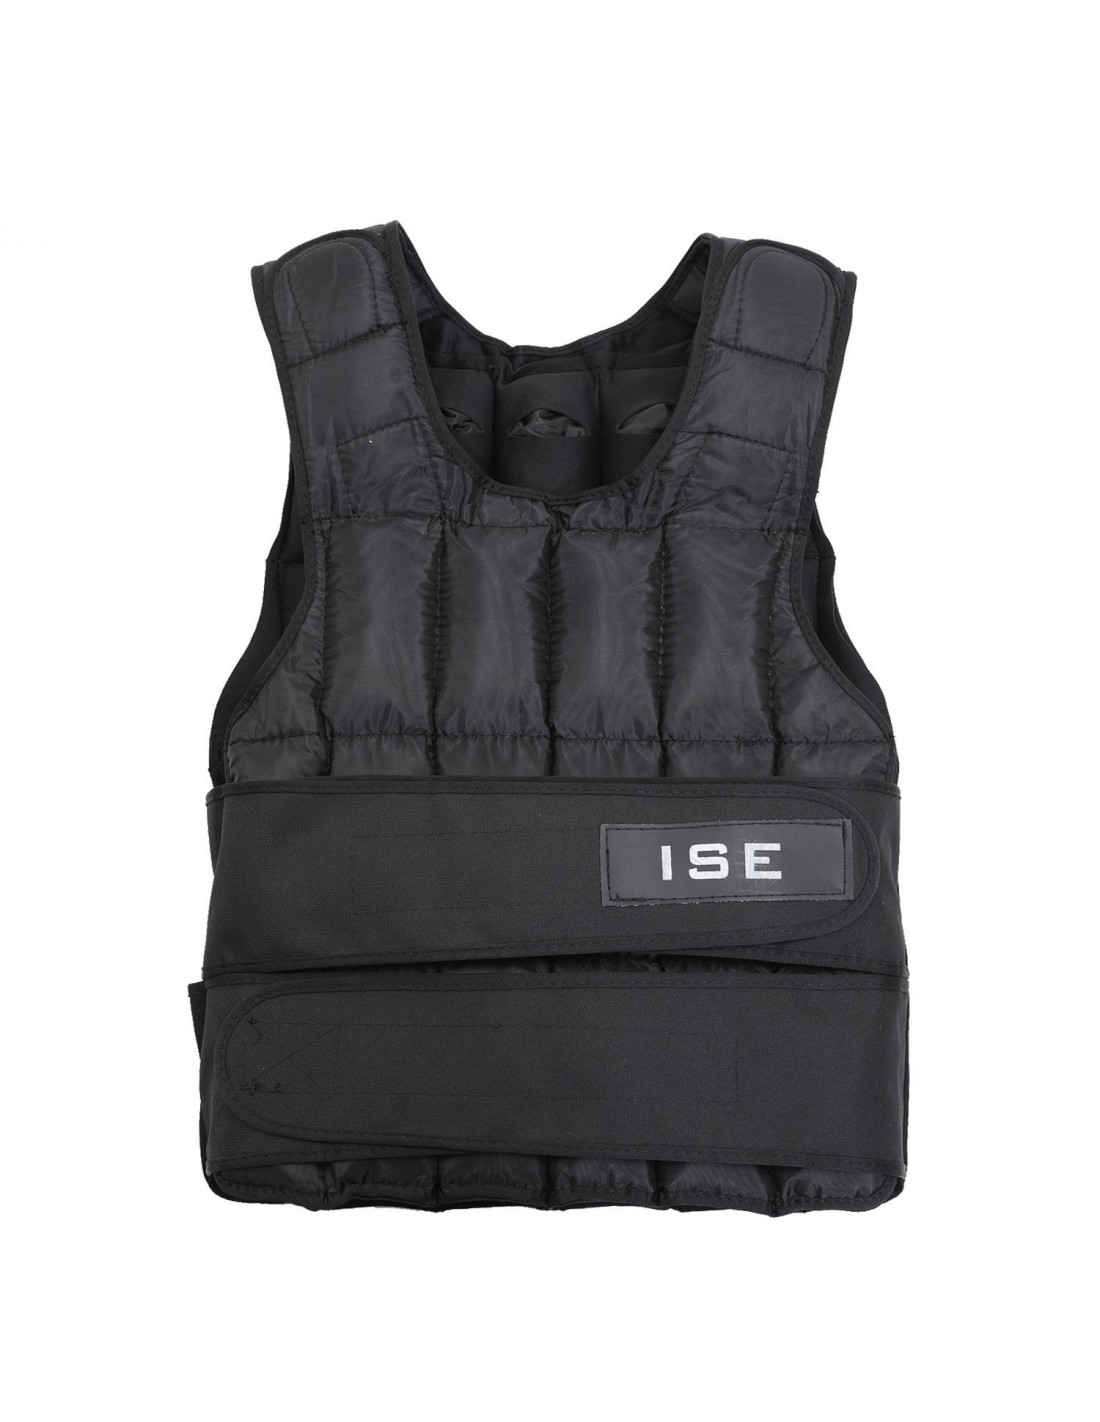 ISE FIT. WEIGHTED VEST. ADJUSTABLE WEIGHT. CROSS TRAINING. 25 KG.